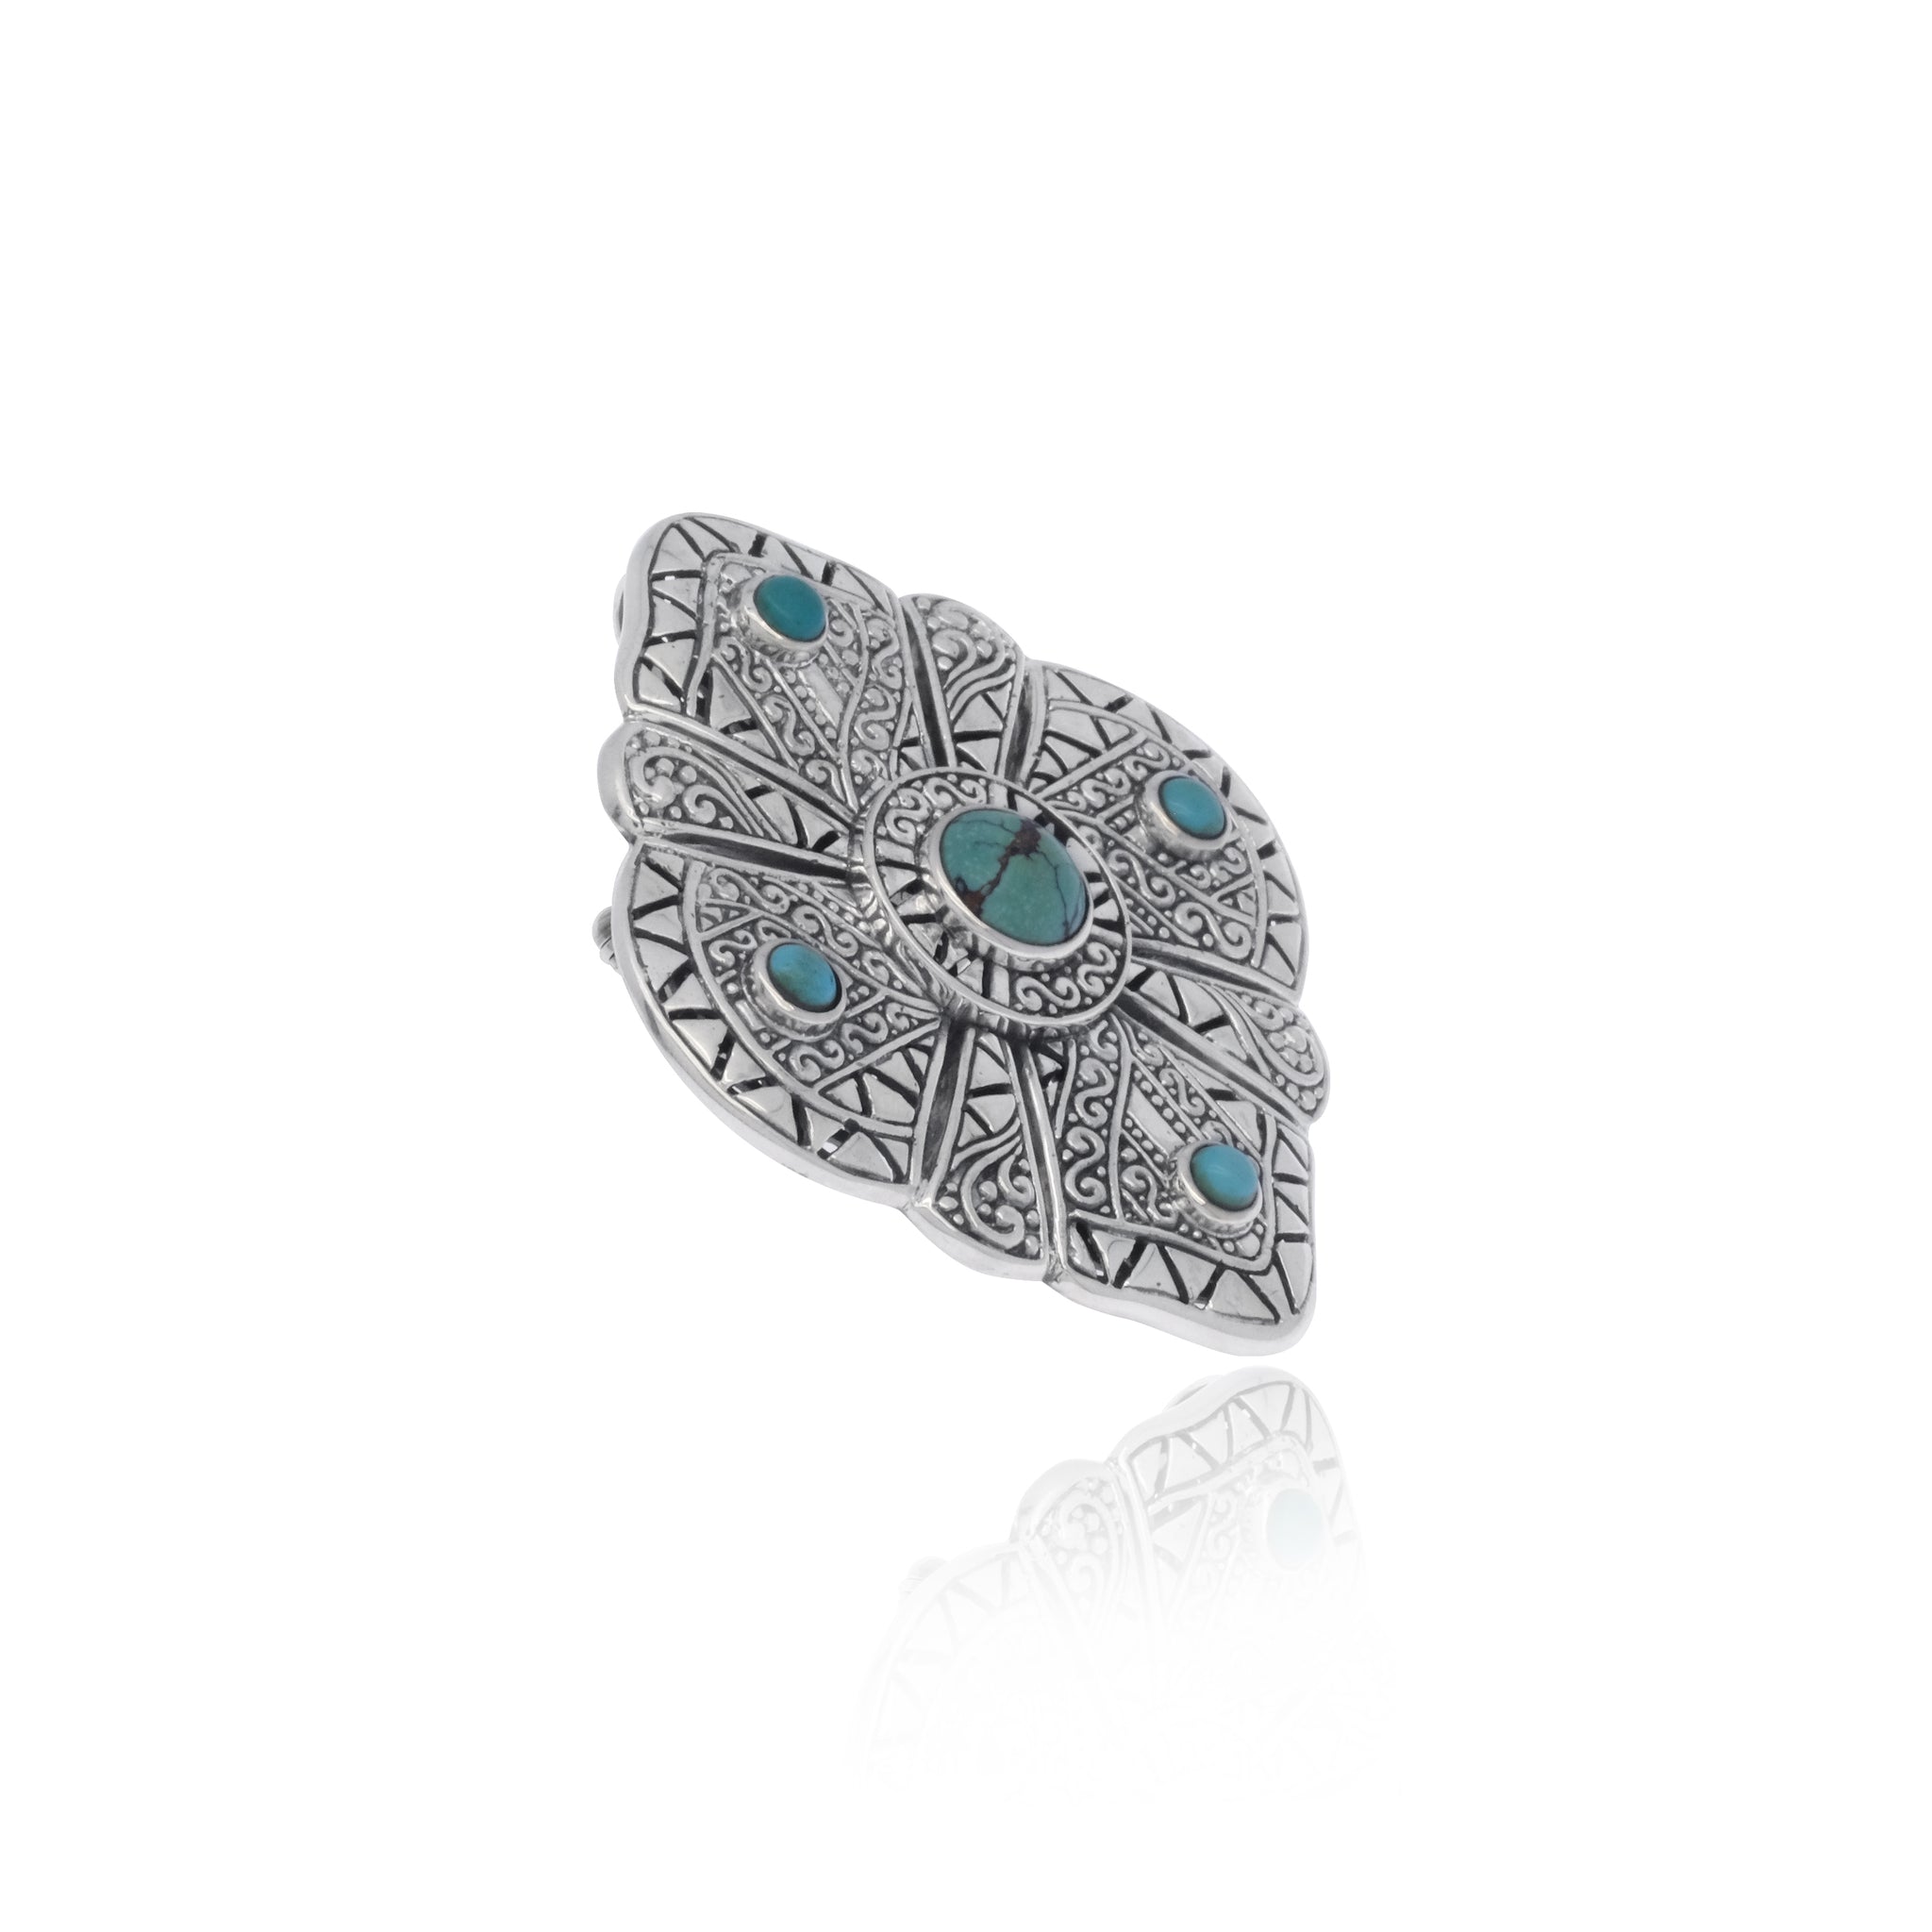 Boho Brooch Pendant With Turquoise In Sterling Silver